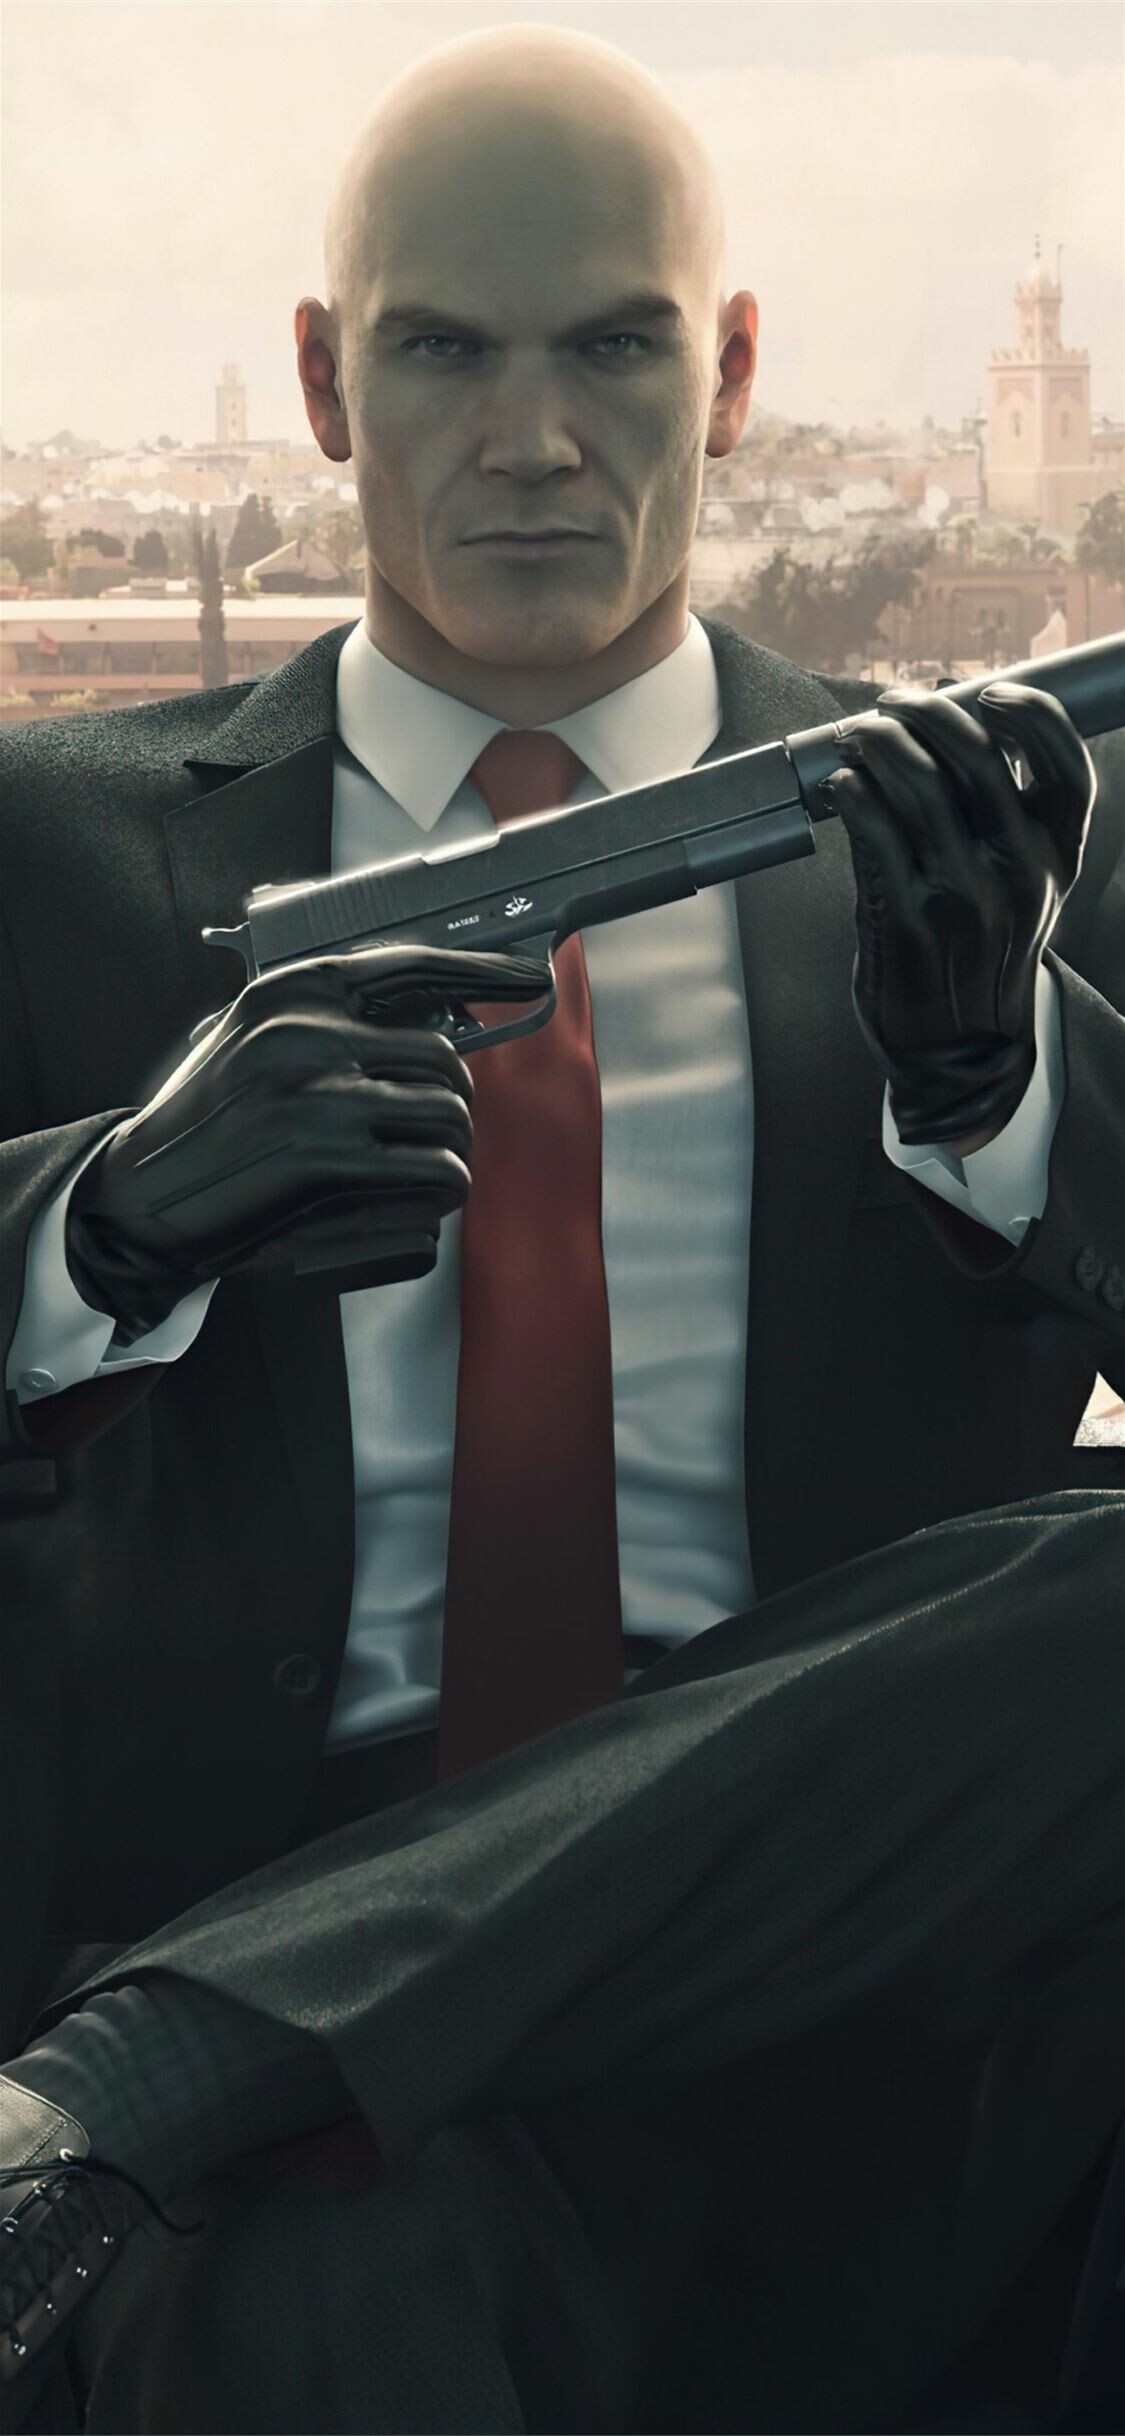 Hitman game, iPhone X wallpapers, Free download, Gaming on the go, 1130x2440 HD Phone